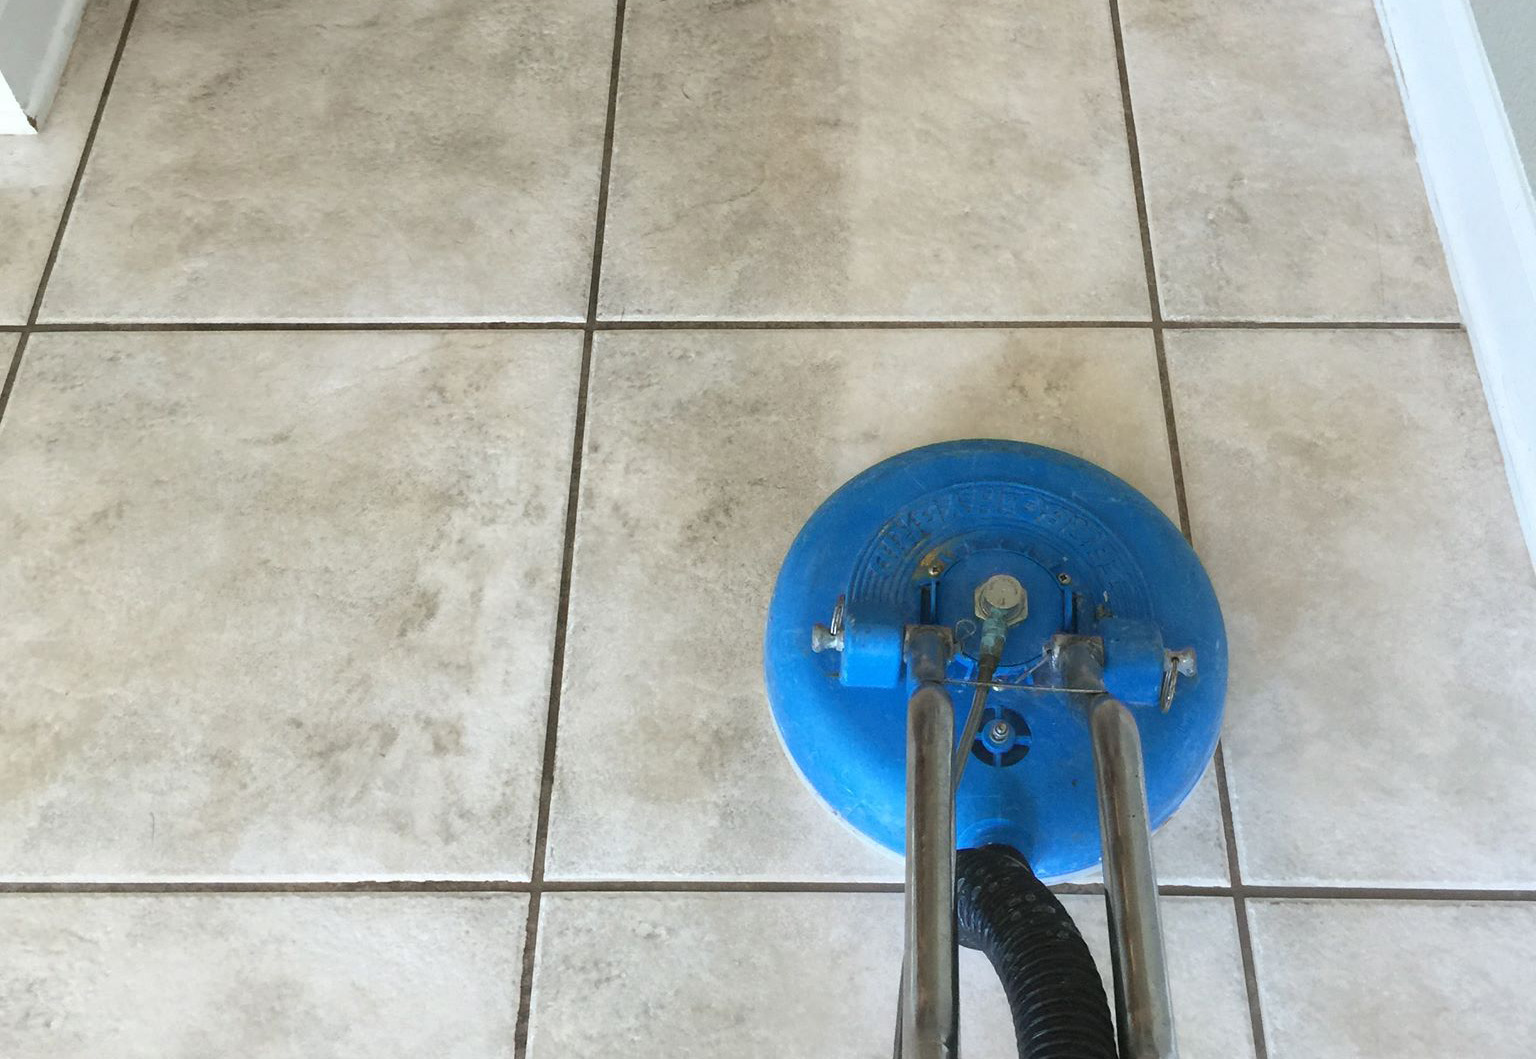 Tile and Grout Cleaning Experts in Orlando fl to remove all your dirt and grime